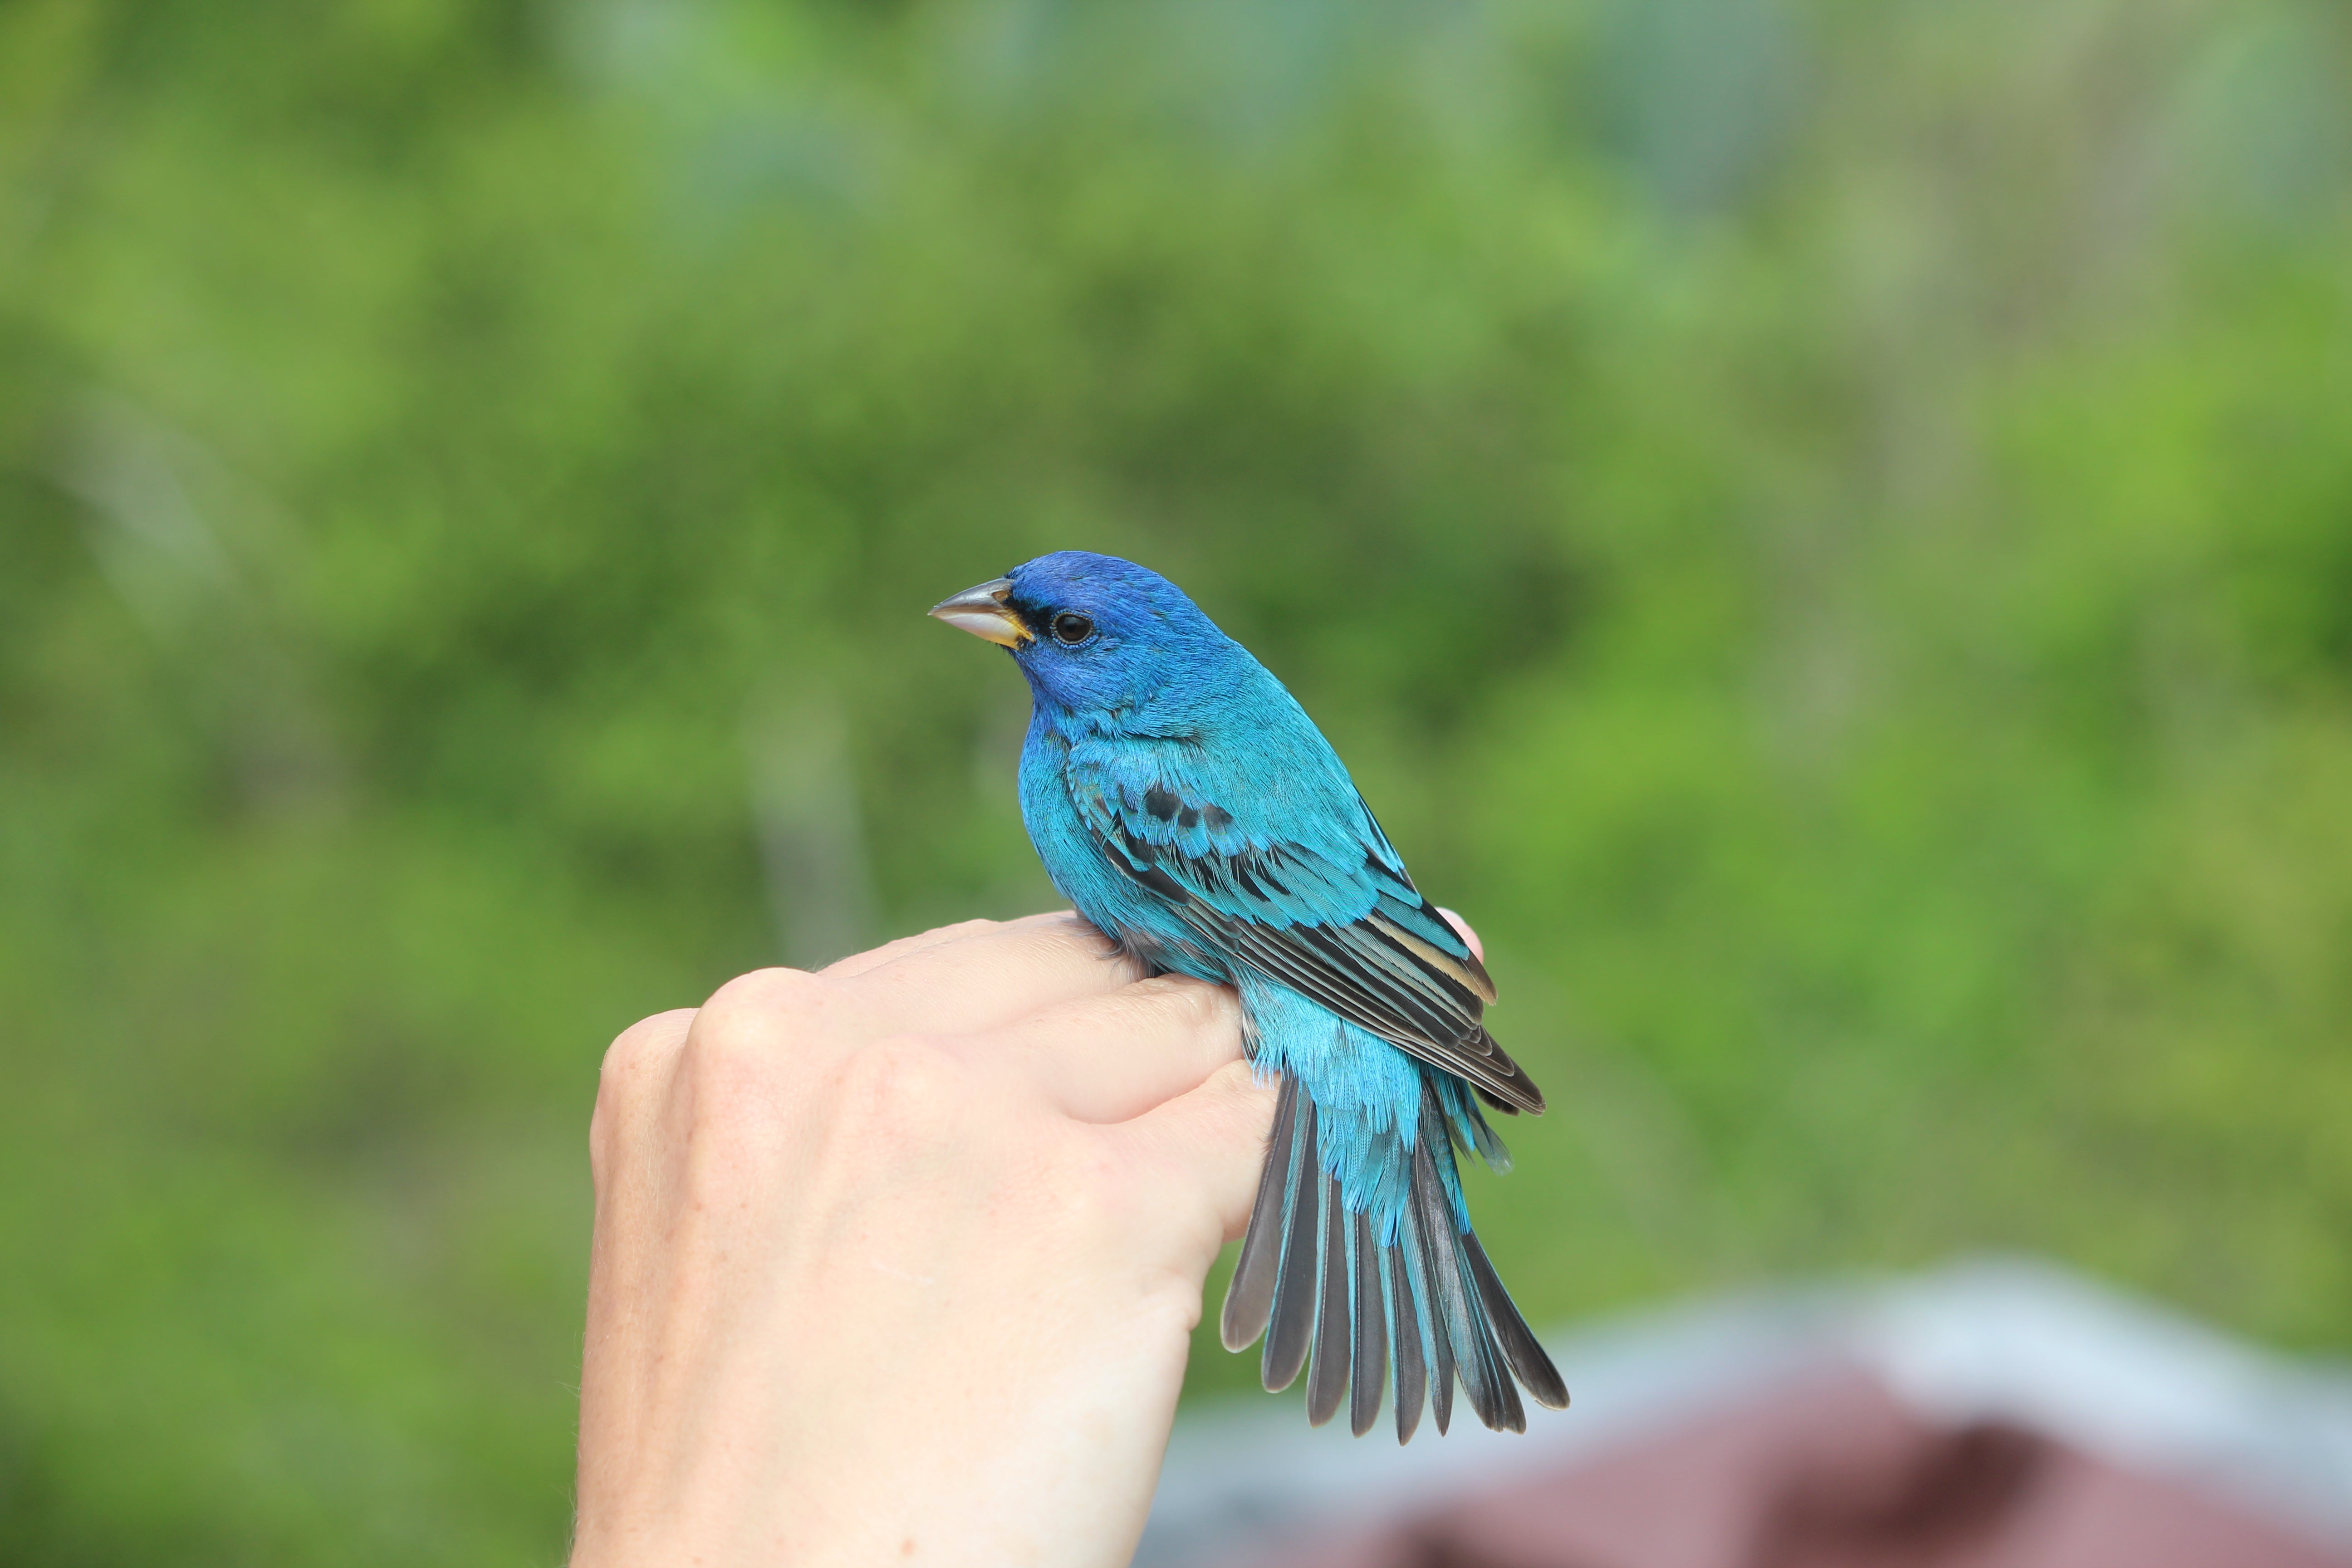 A blue bird in someone's hand